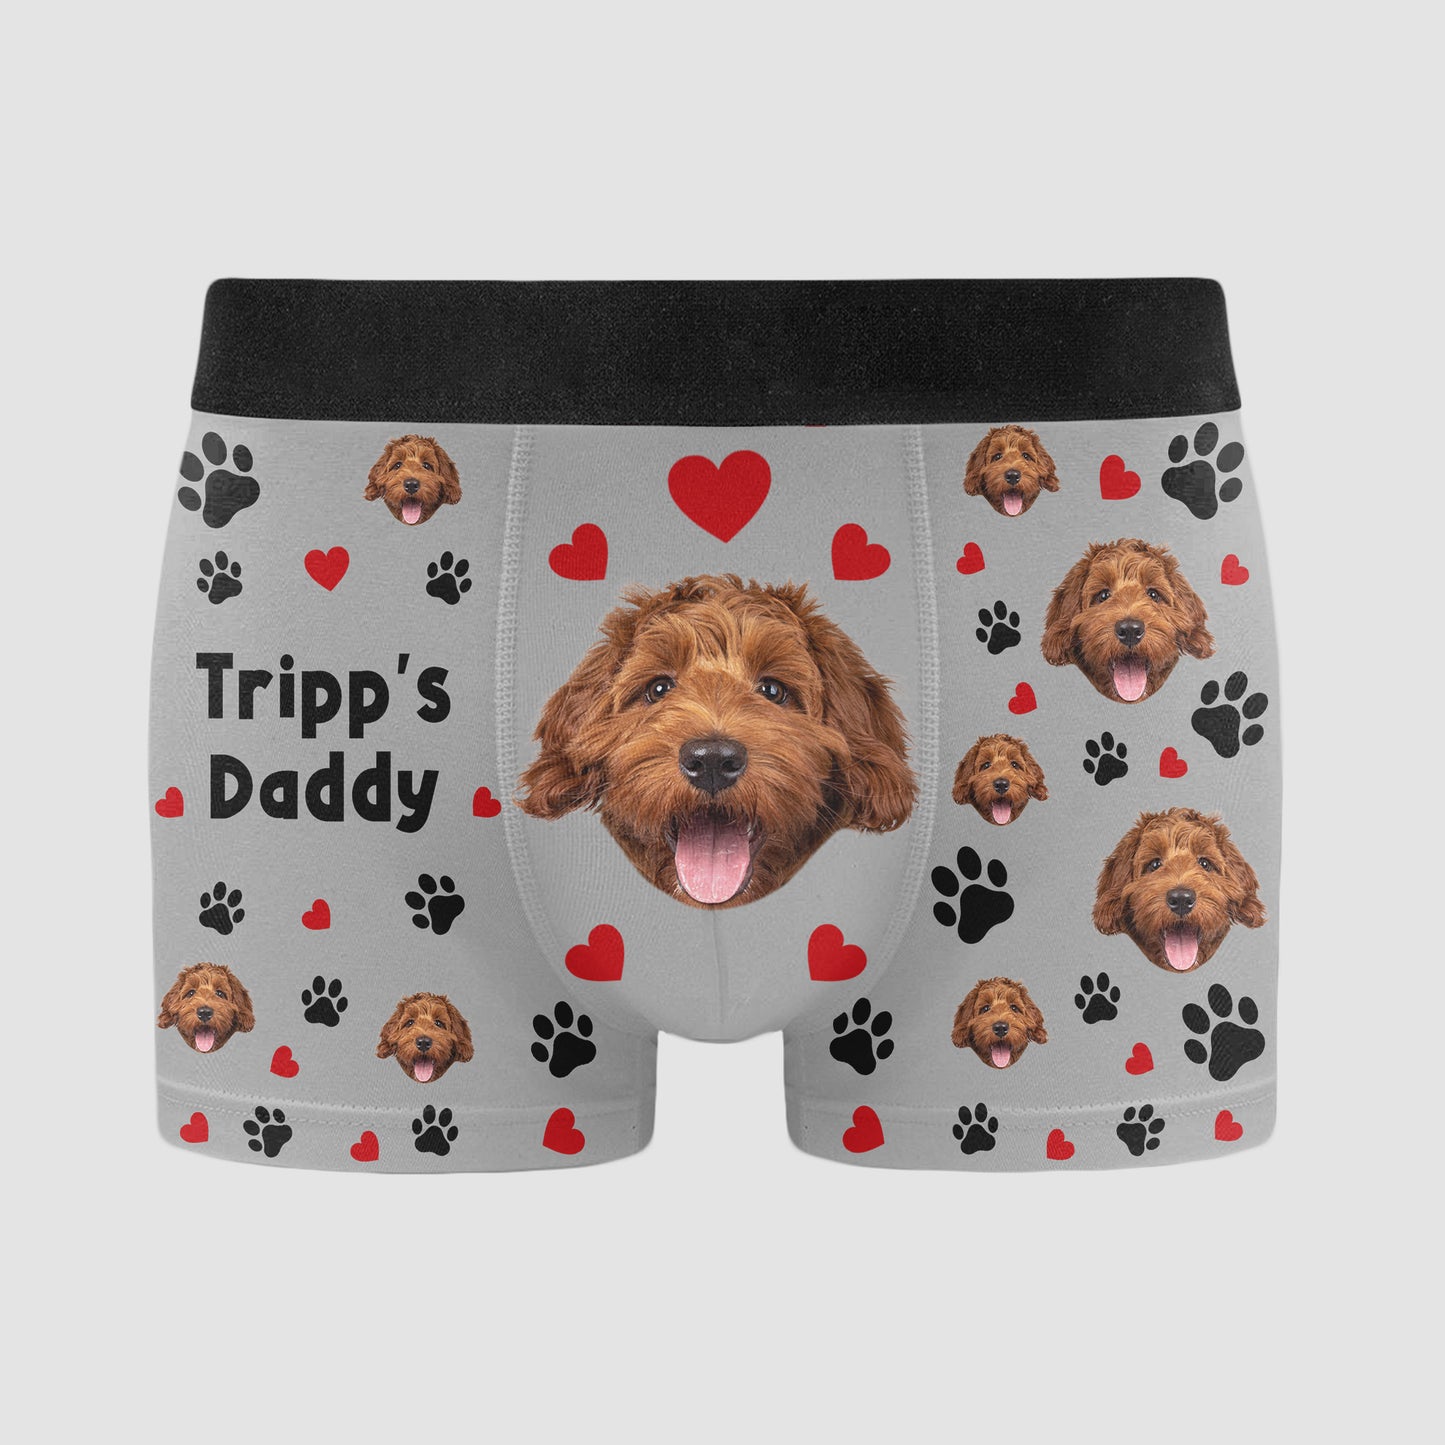 Glohox Customized Boxers for Men with Photo,Custom Faces Print Boxer Briefs  with Dog Face on Them Personalized Boxers for Men XS at  Men's  Clothing store